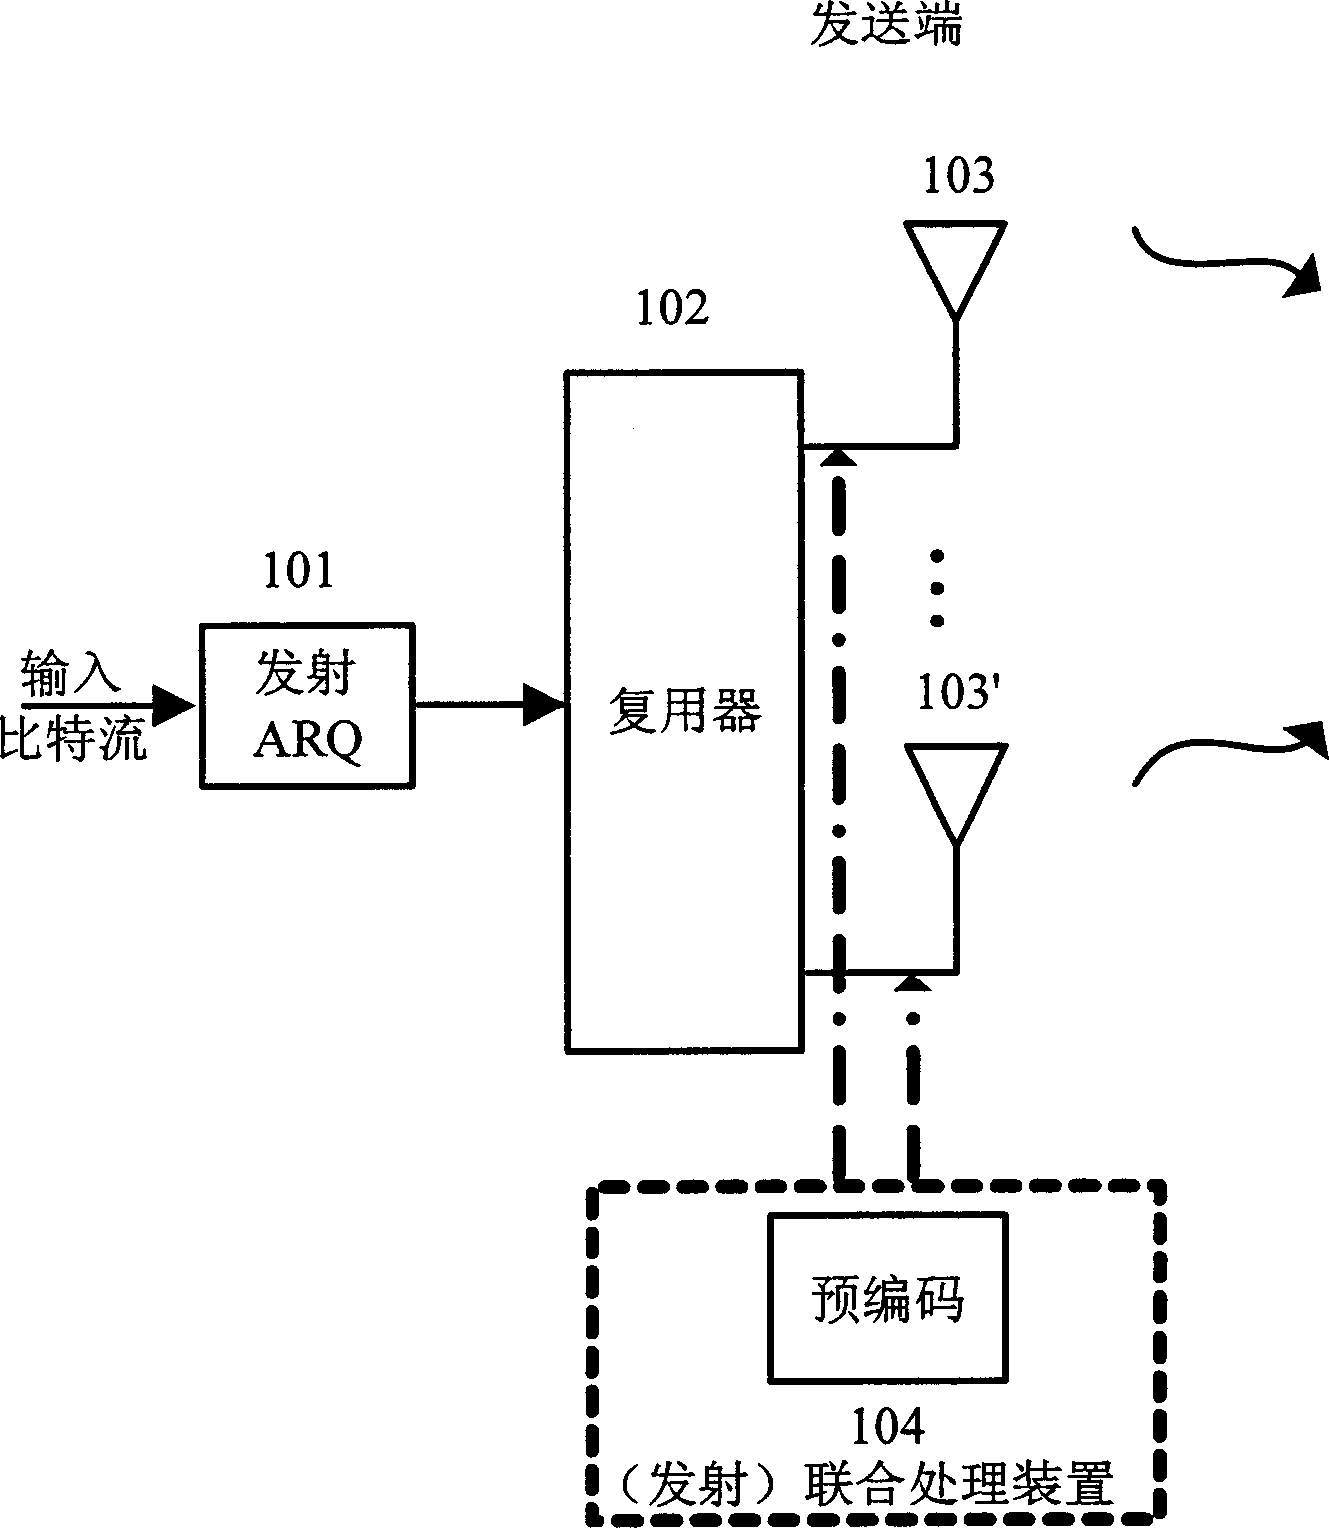 Automatic retransmission requesting method using channel decomposition, and transmit/receive processing unit